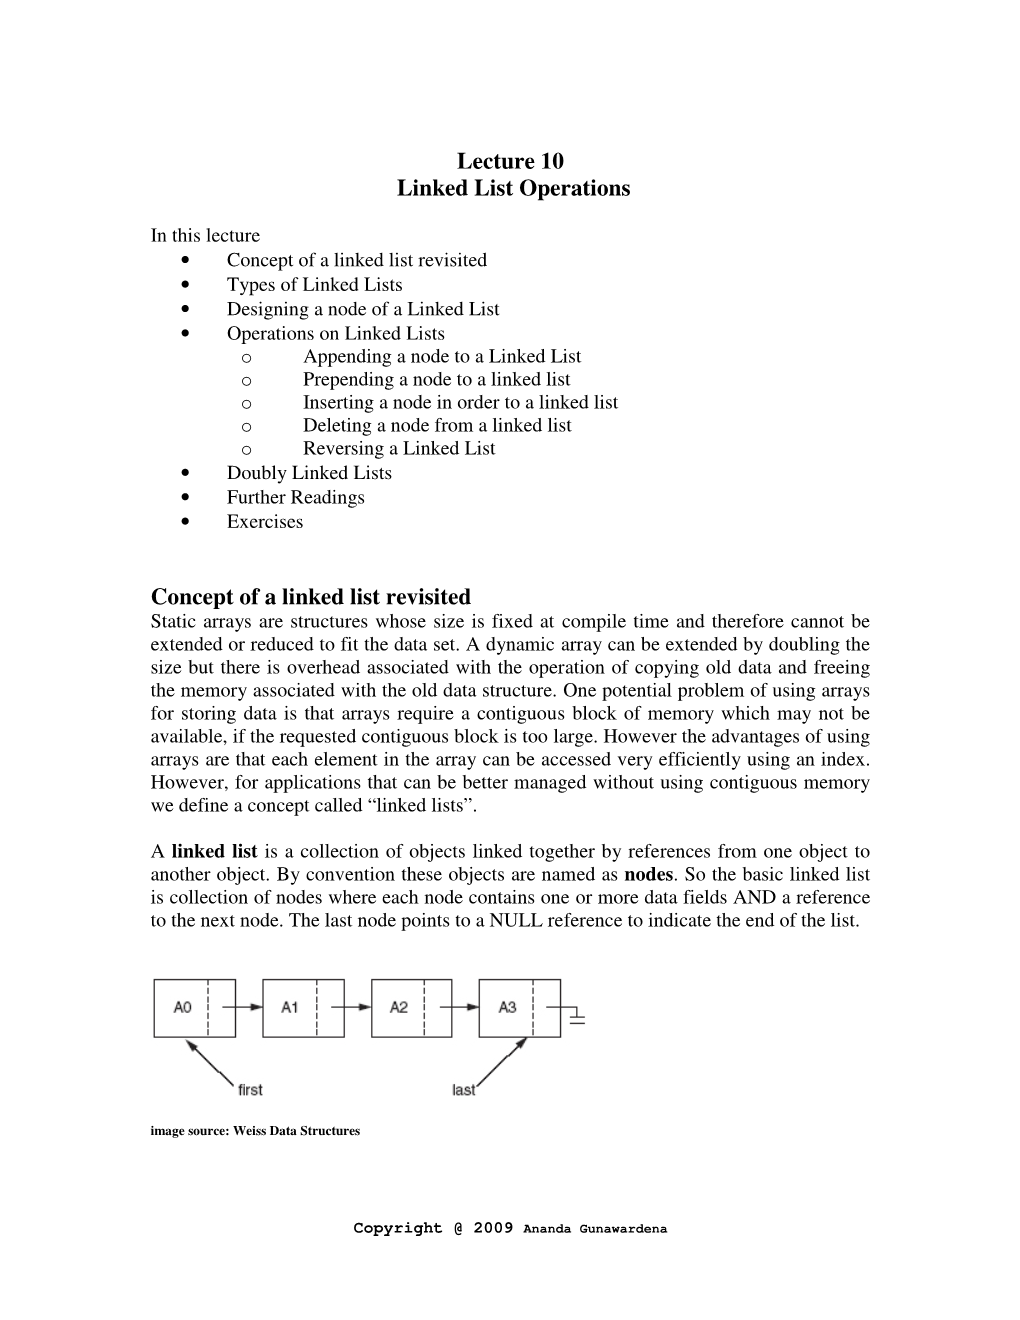 Lecture 10 Linked List Operations